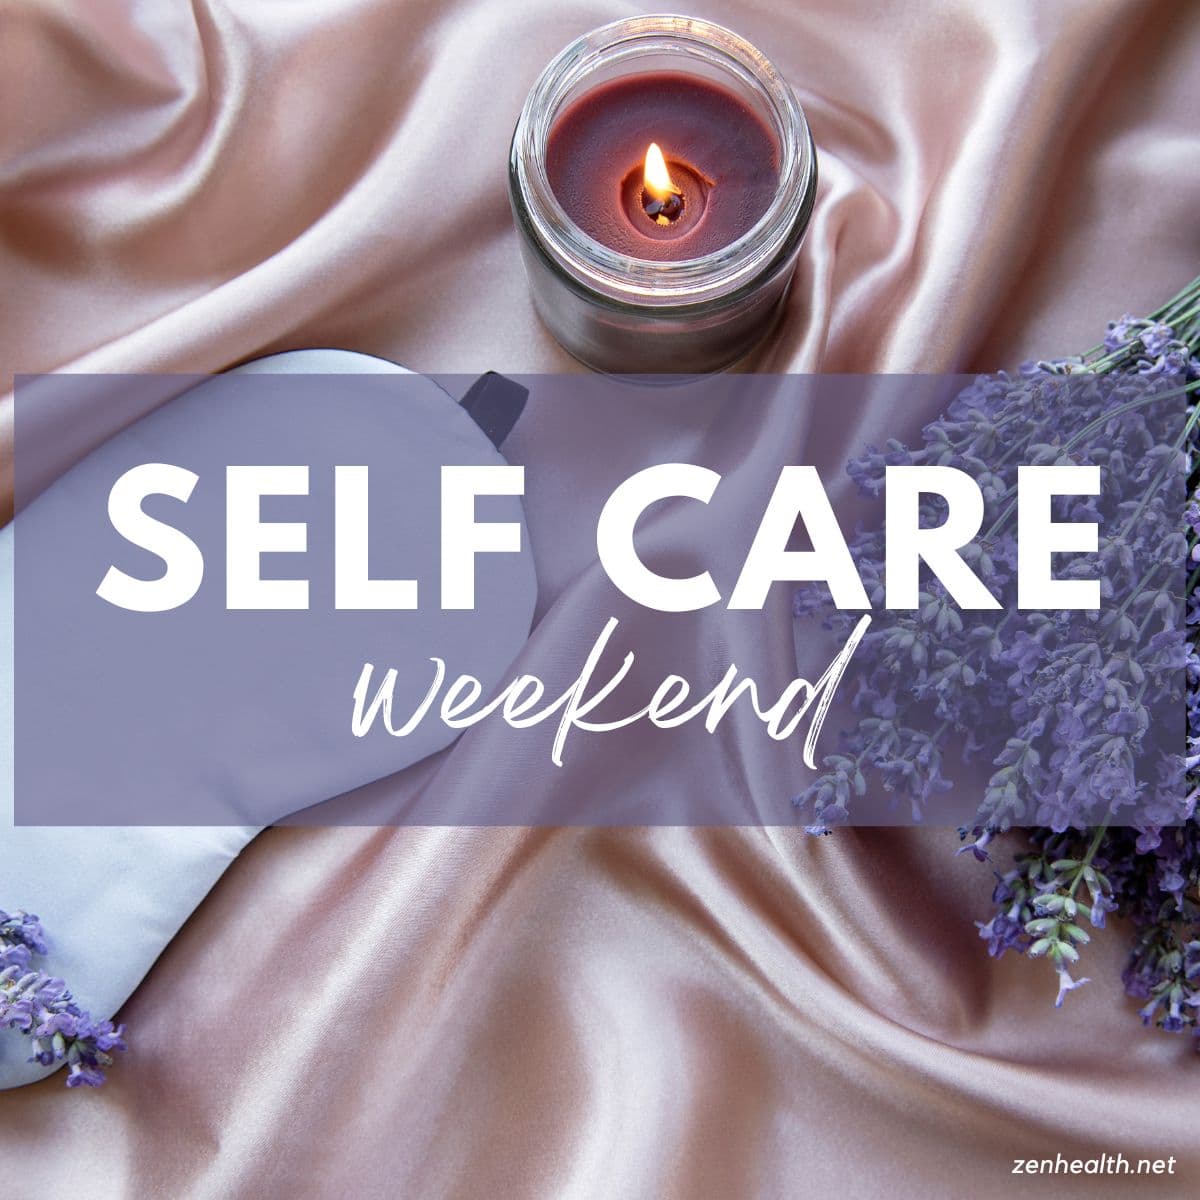 40 Self Care Weekend Ideas to Destress and Relax